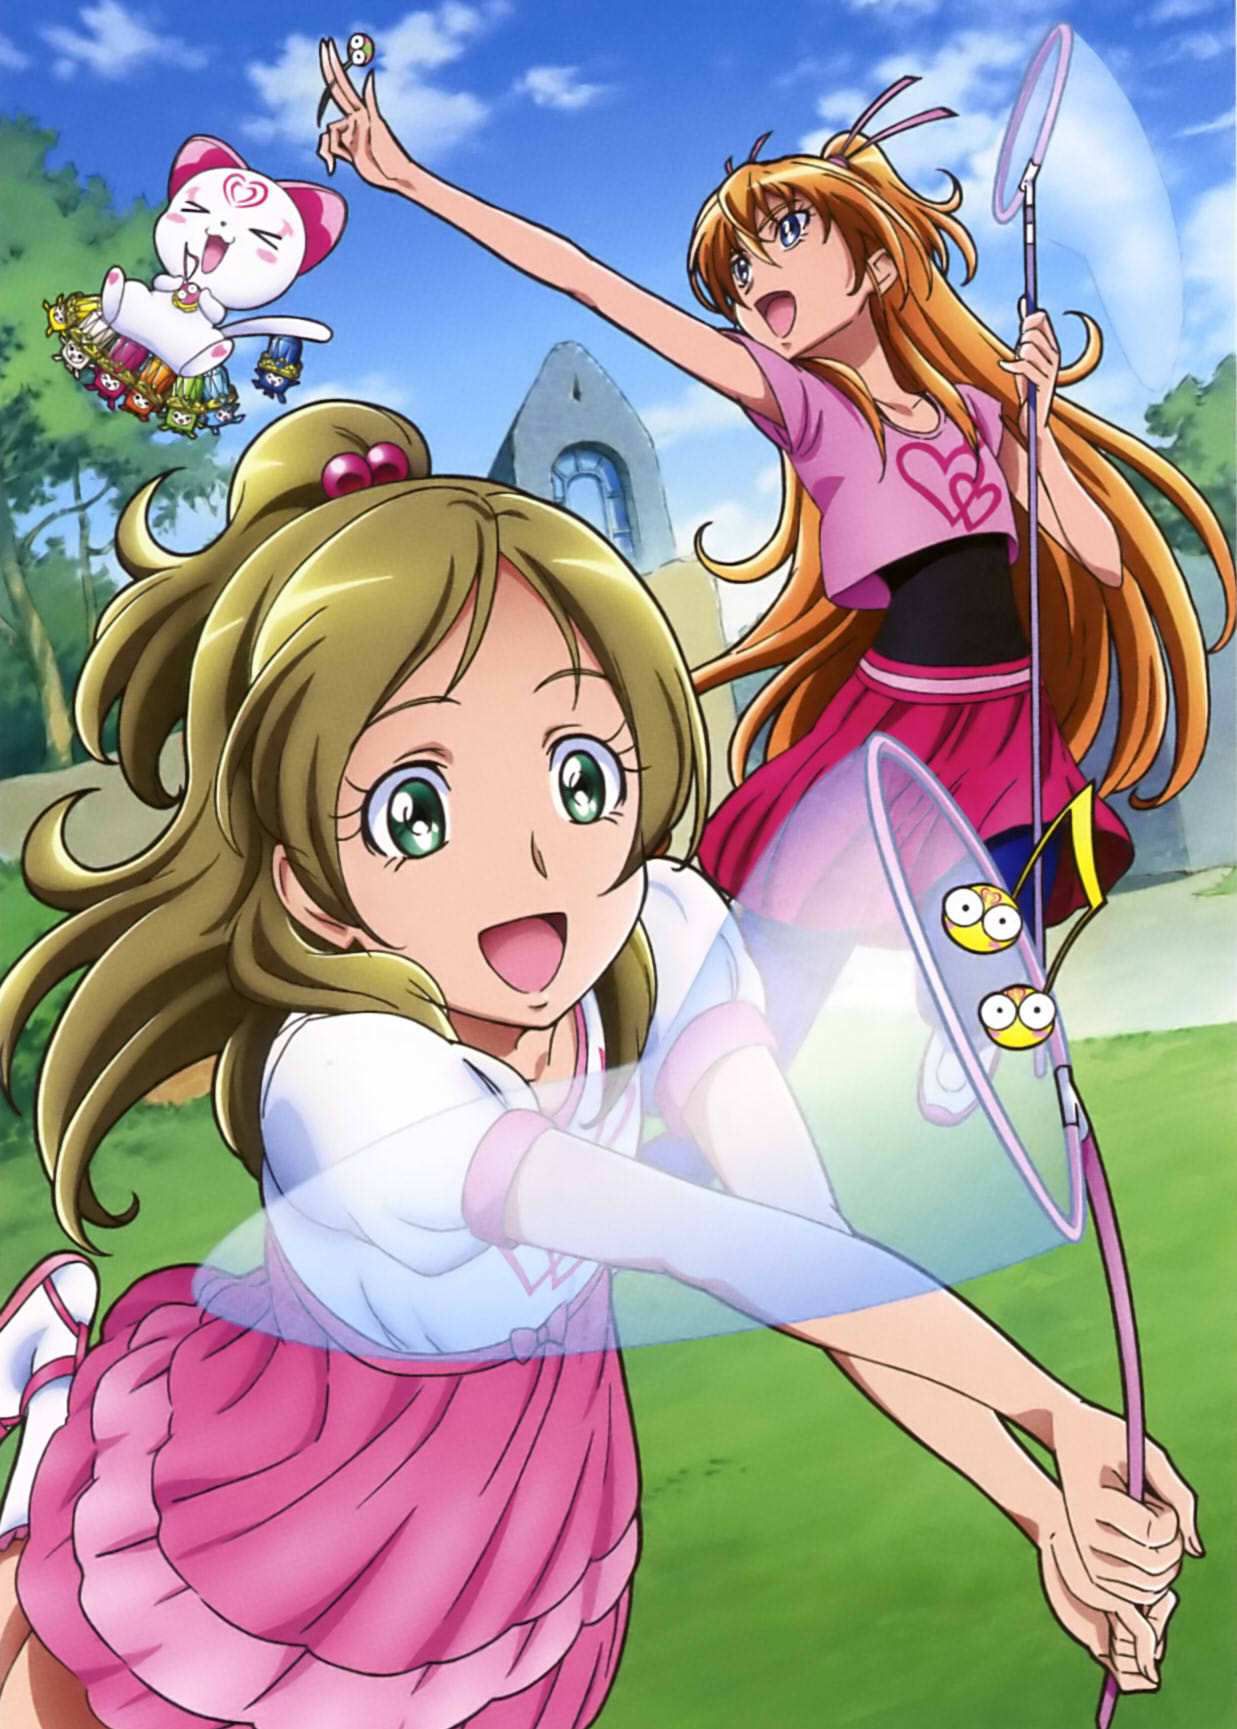 [Suite PreCure] erotic images of Cure Melody and Curism. 26 18